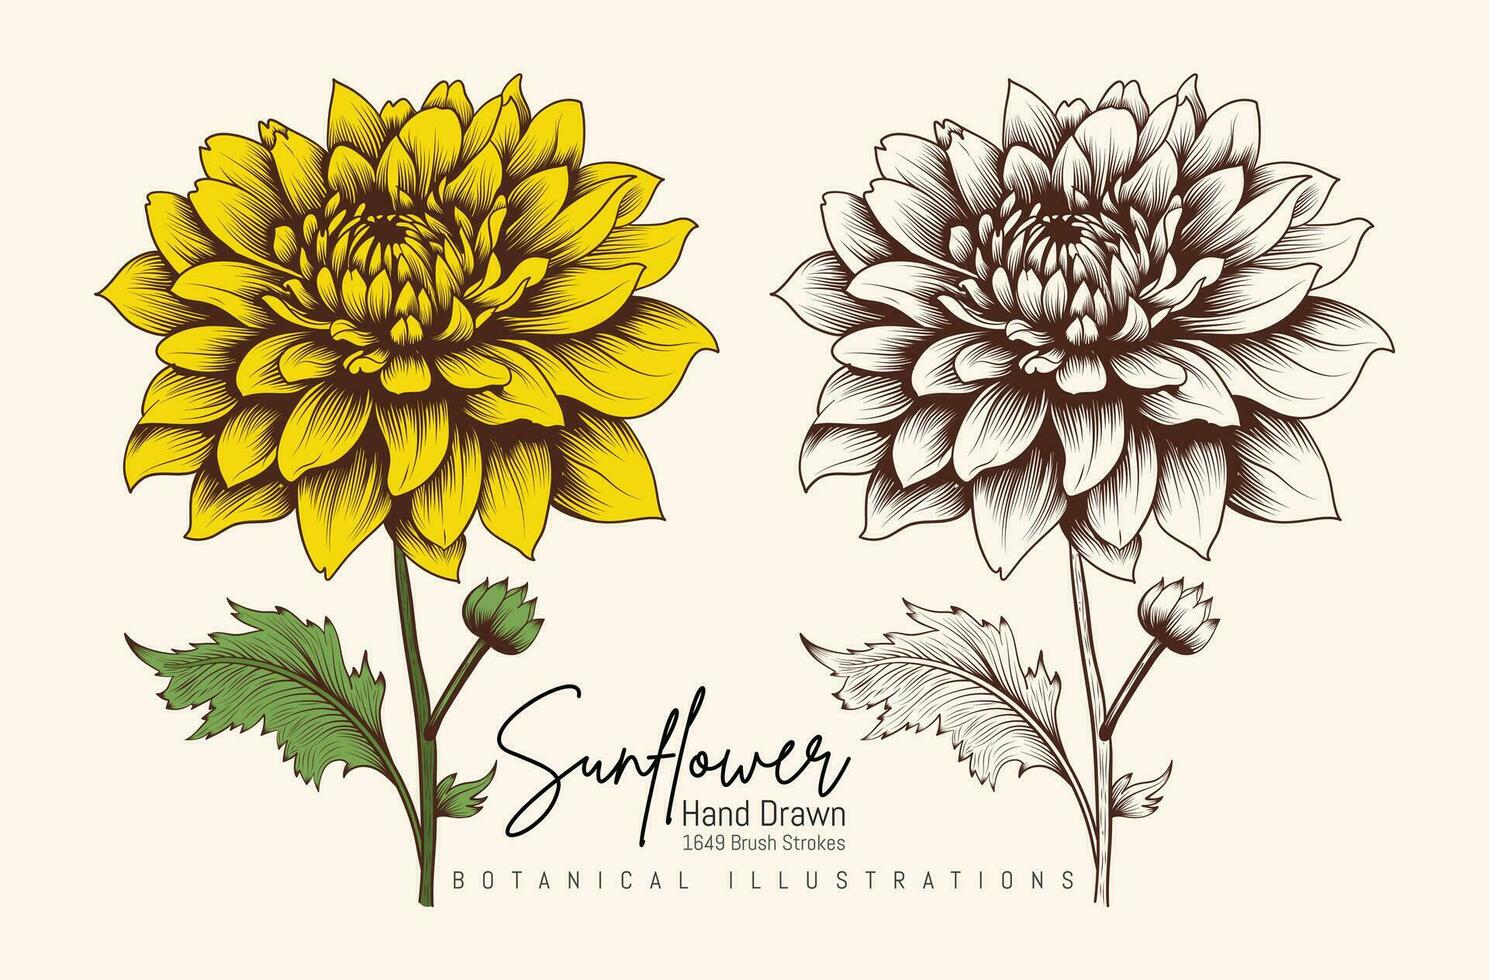 Hand Drawn Vintage Sunflower Highly Detailed Vector Drawing. Drawn Sketch Elements Botanical Illustrations.